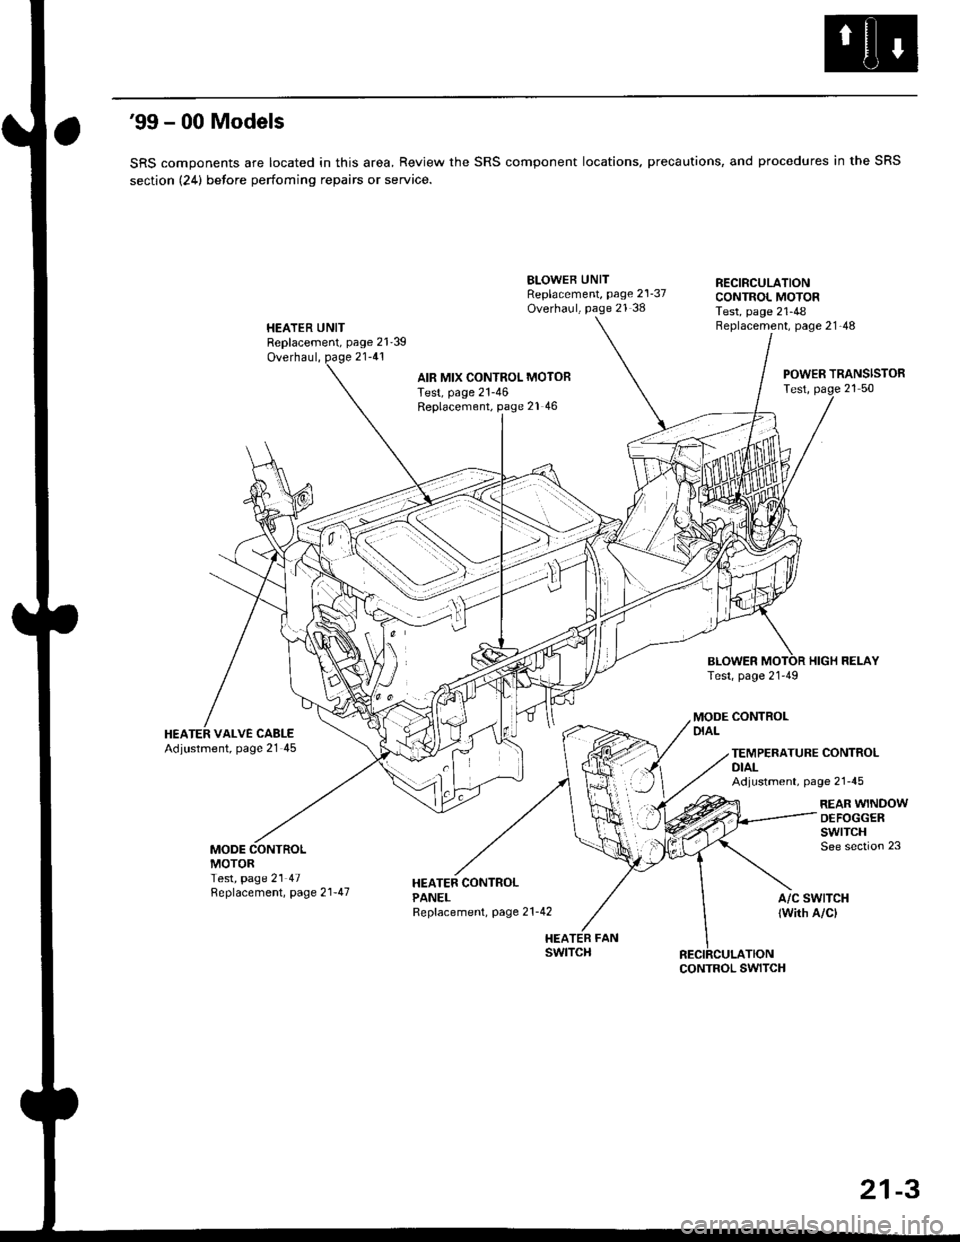 HONDA CIVIC 1996 6.G Workshop Manual 99 - 00 Models
SRS components are located in this area, Review the SRS component locations, precautions, and procedures in the SRS
section (24) betore perfoming repairs or service.
HEATER UNITReplace